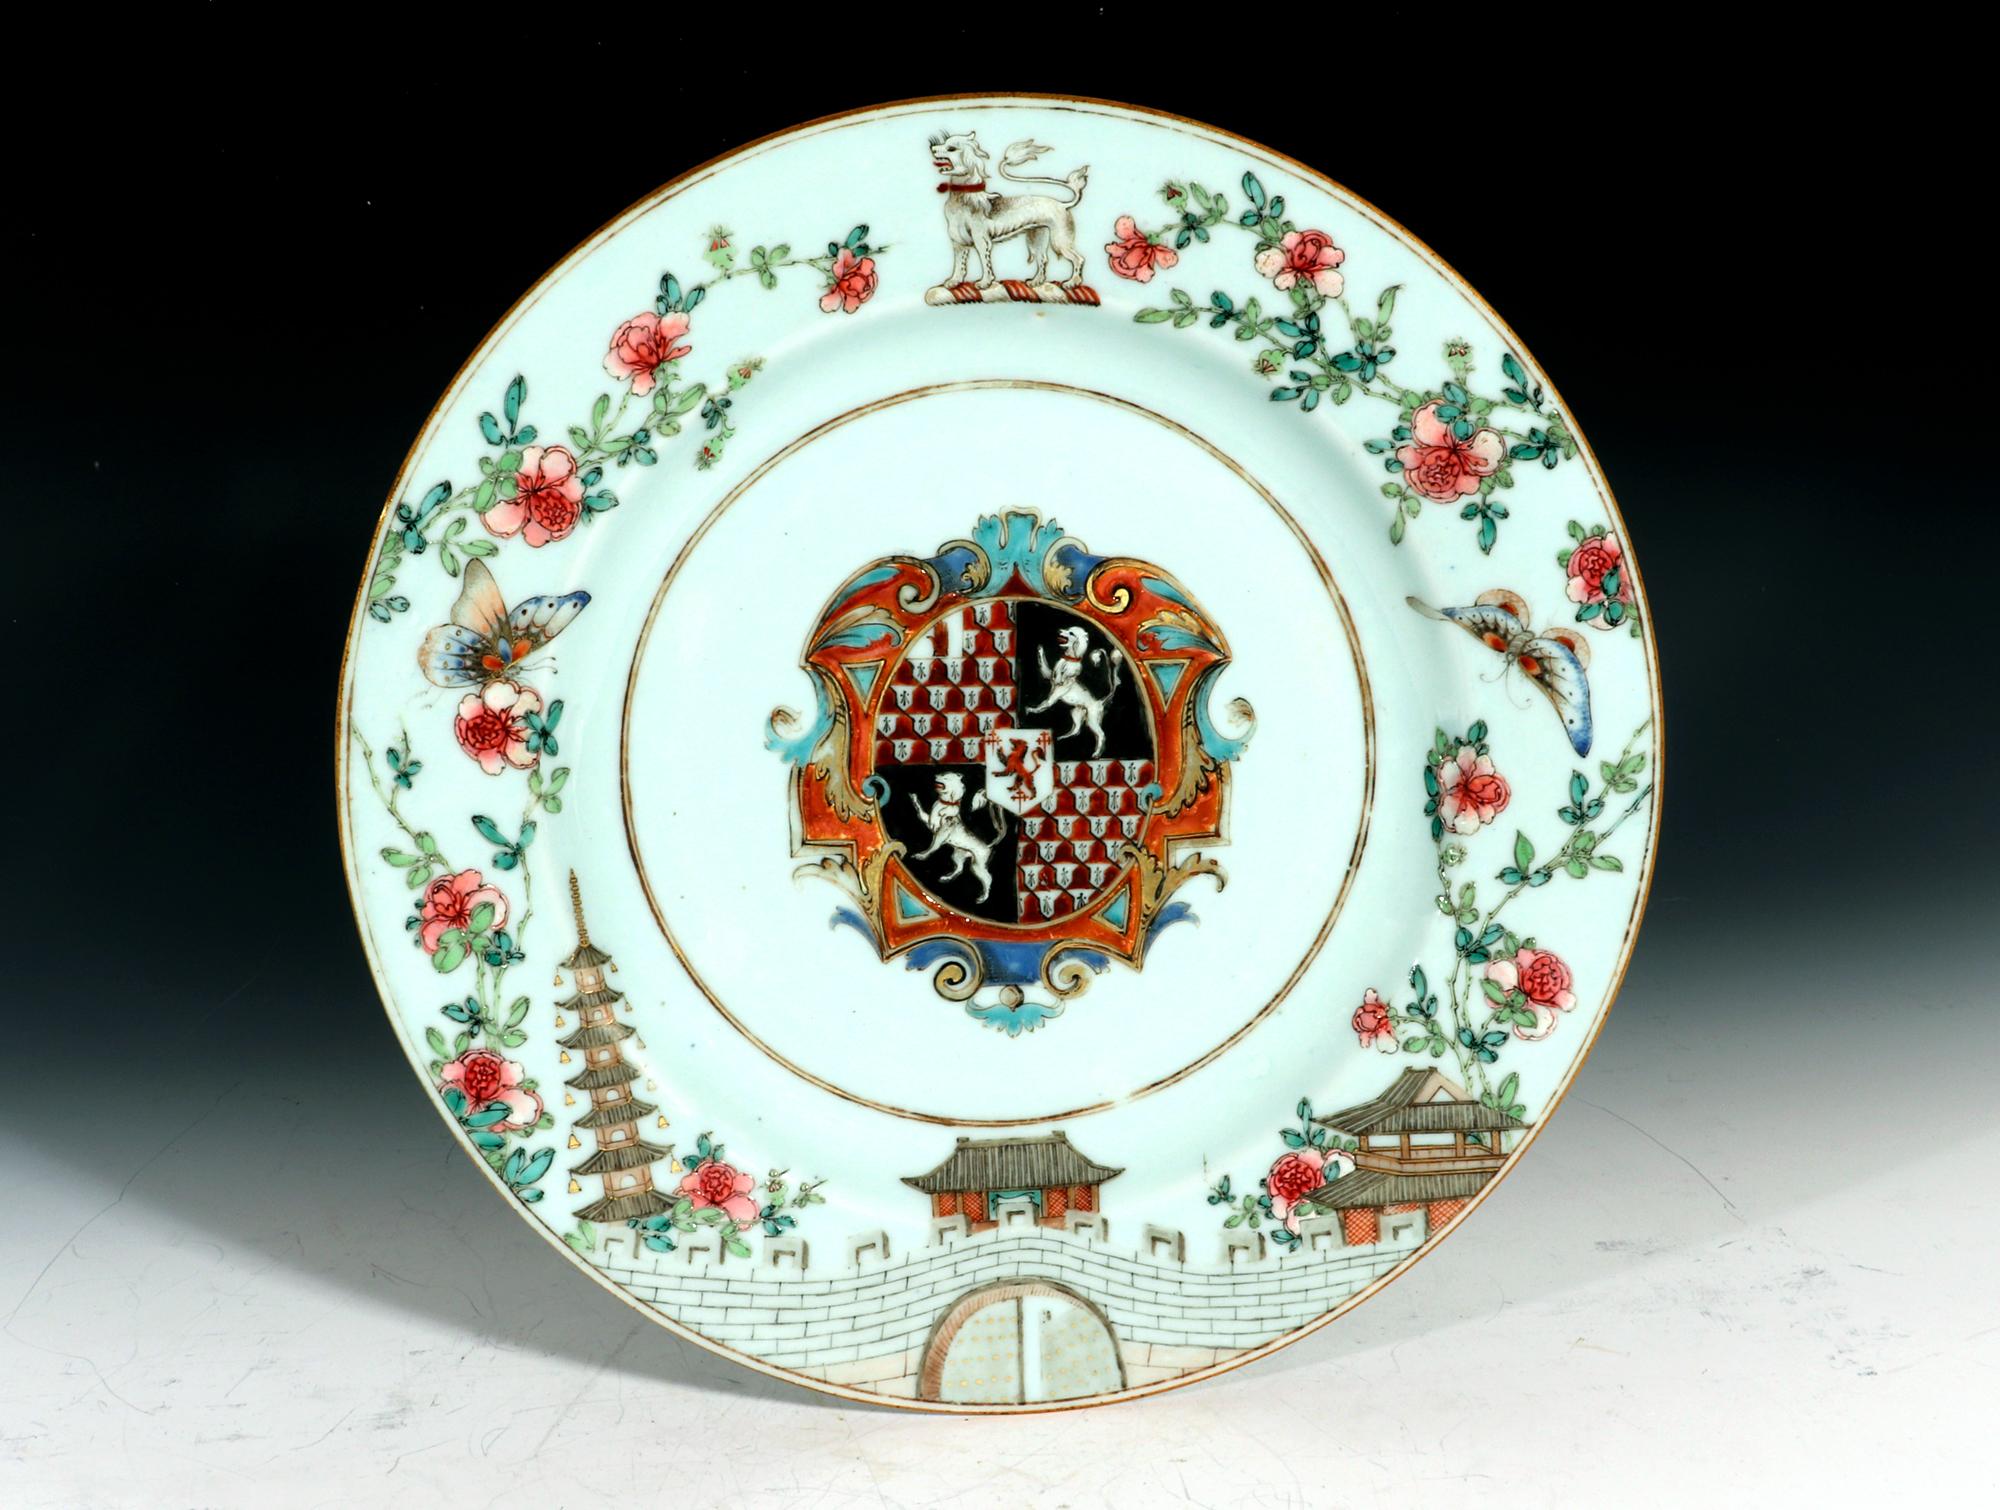 Chinese Export Armorial Porcelain Plate,
Arms of Gresley Quarterly with Bowyer in Pretence,
Yongzheng Period,
1735

This unusual Chinese Export porcelain armorial plate from the Yongzheng period is painted in Famille Rose enamels with the Arms